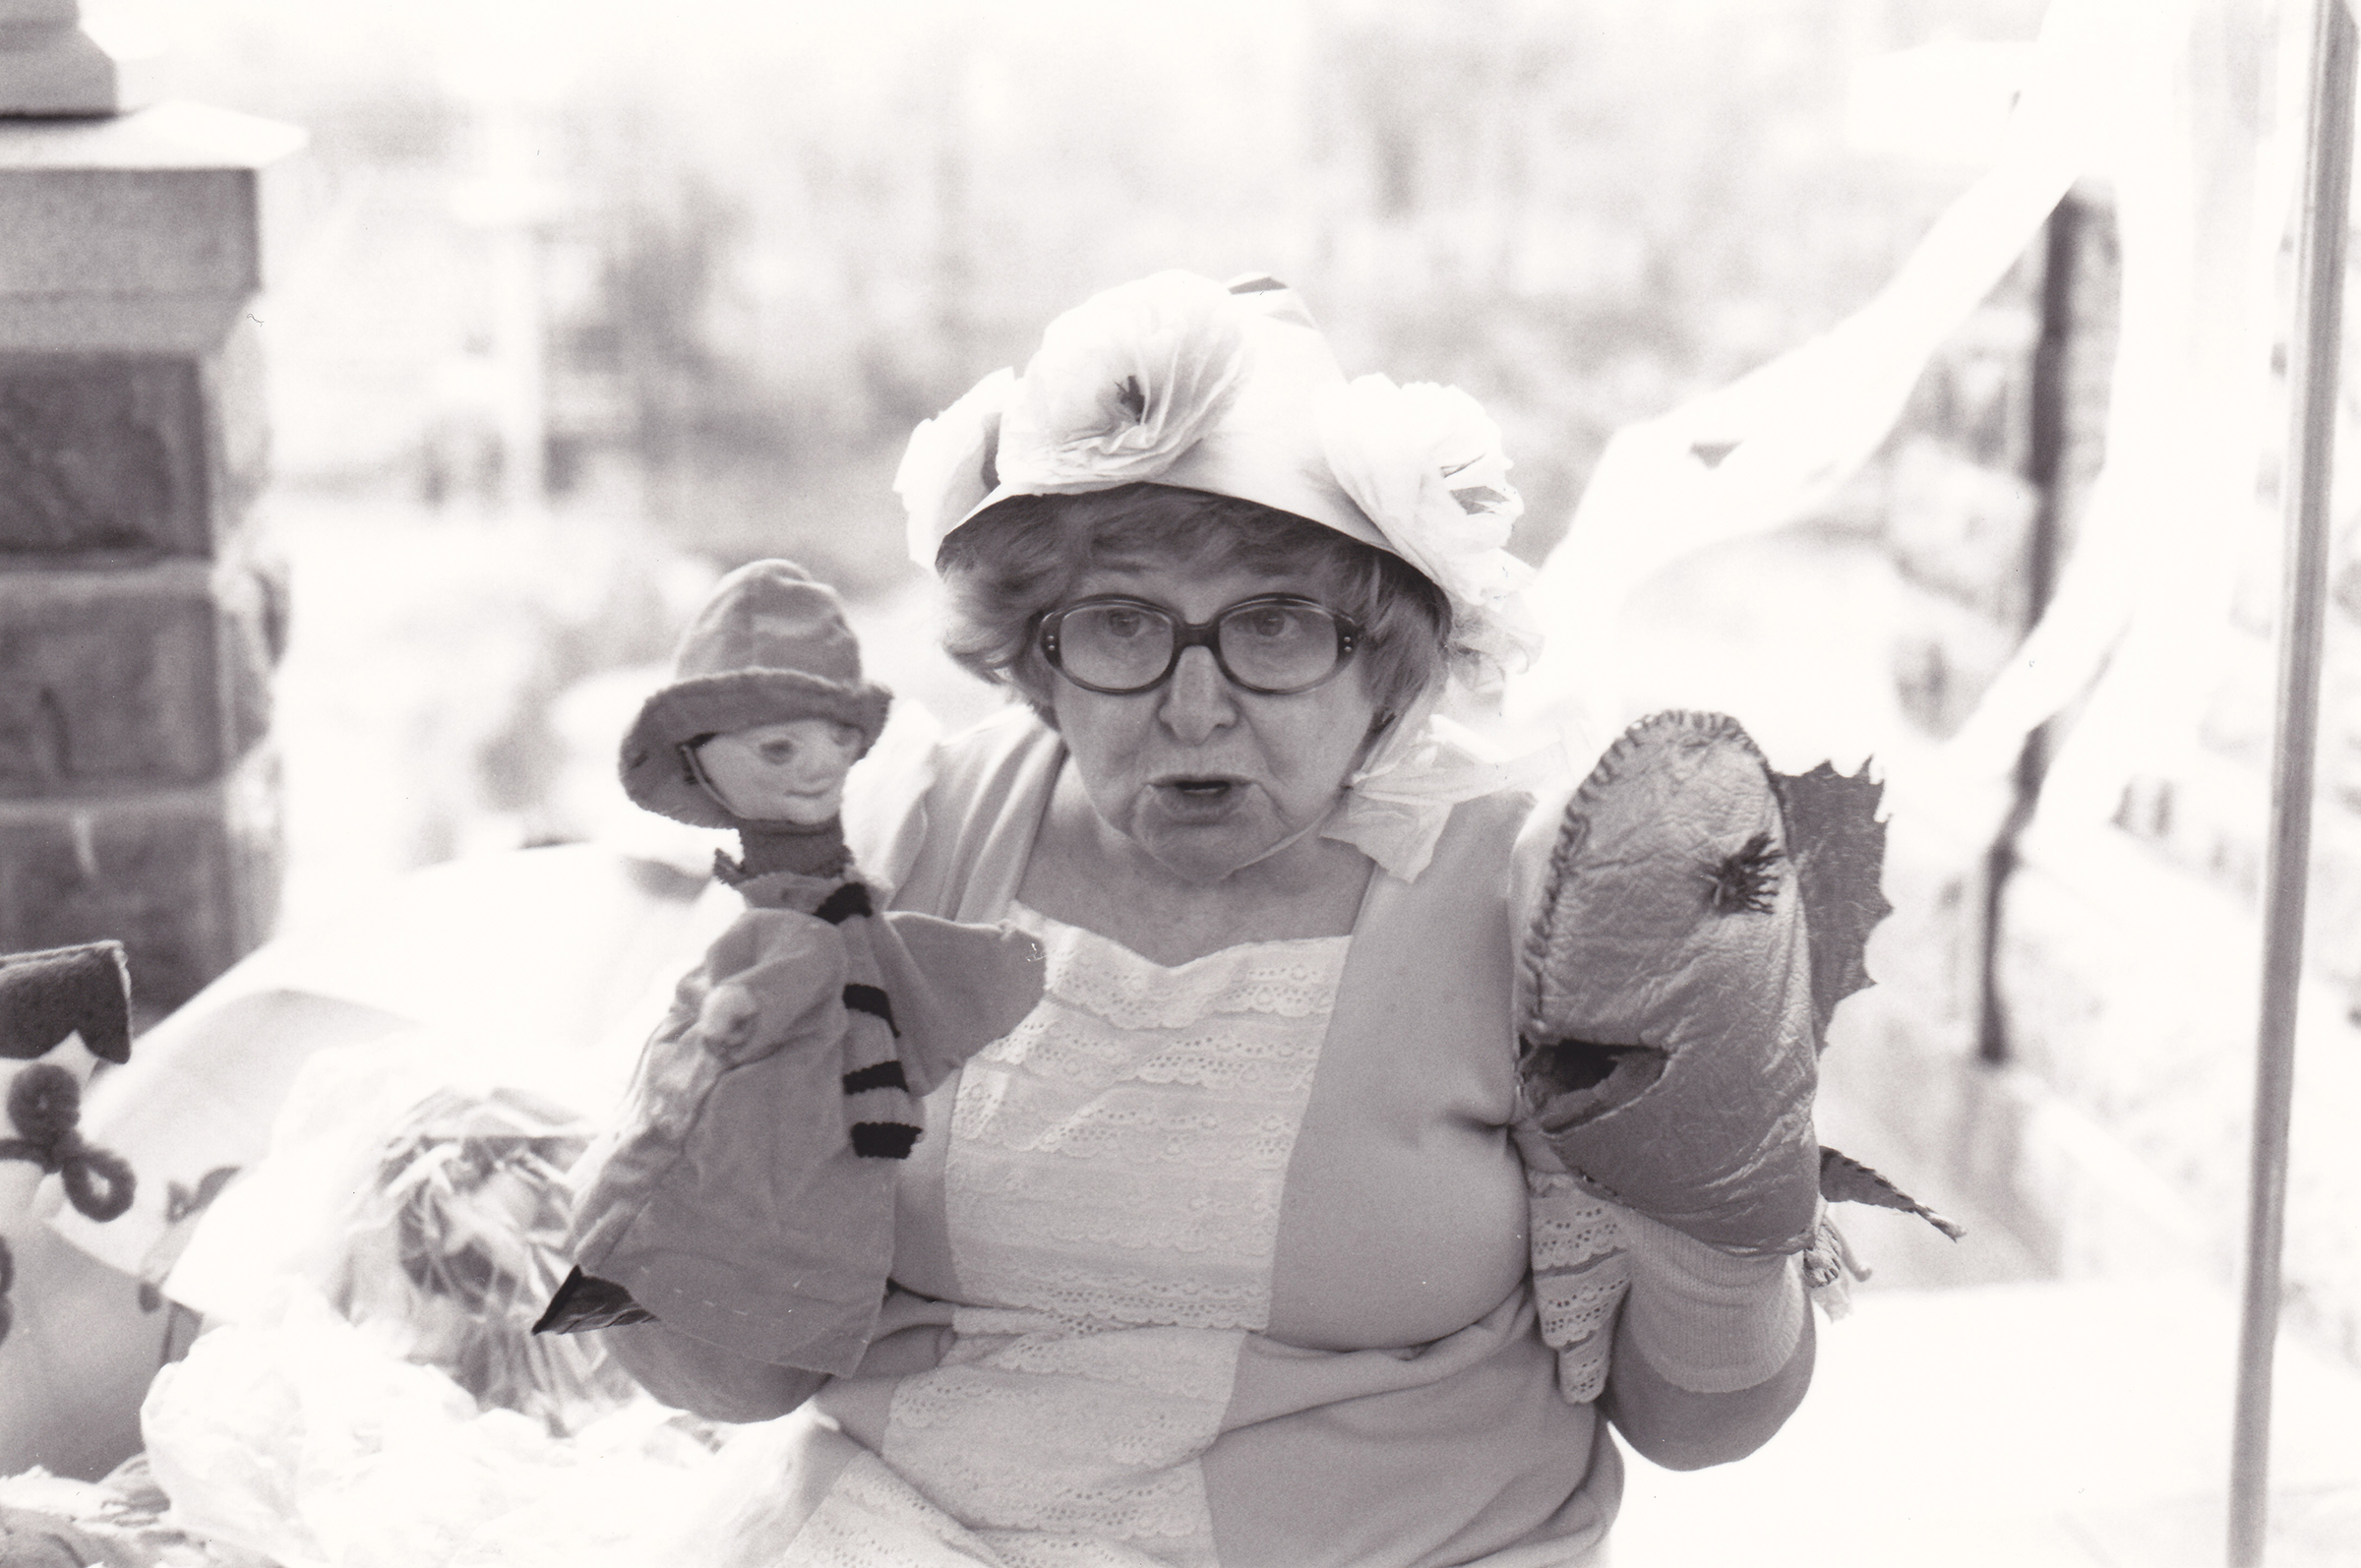 Bernice Silver with her puppets in Central Park in April, 1988